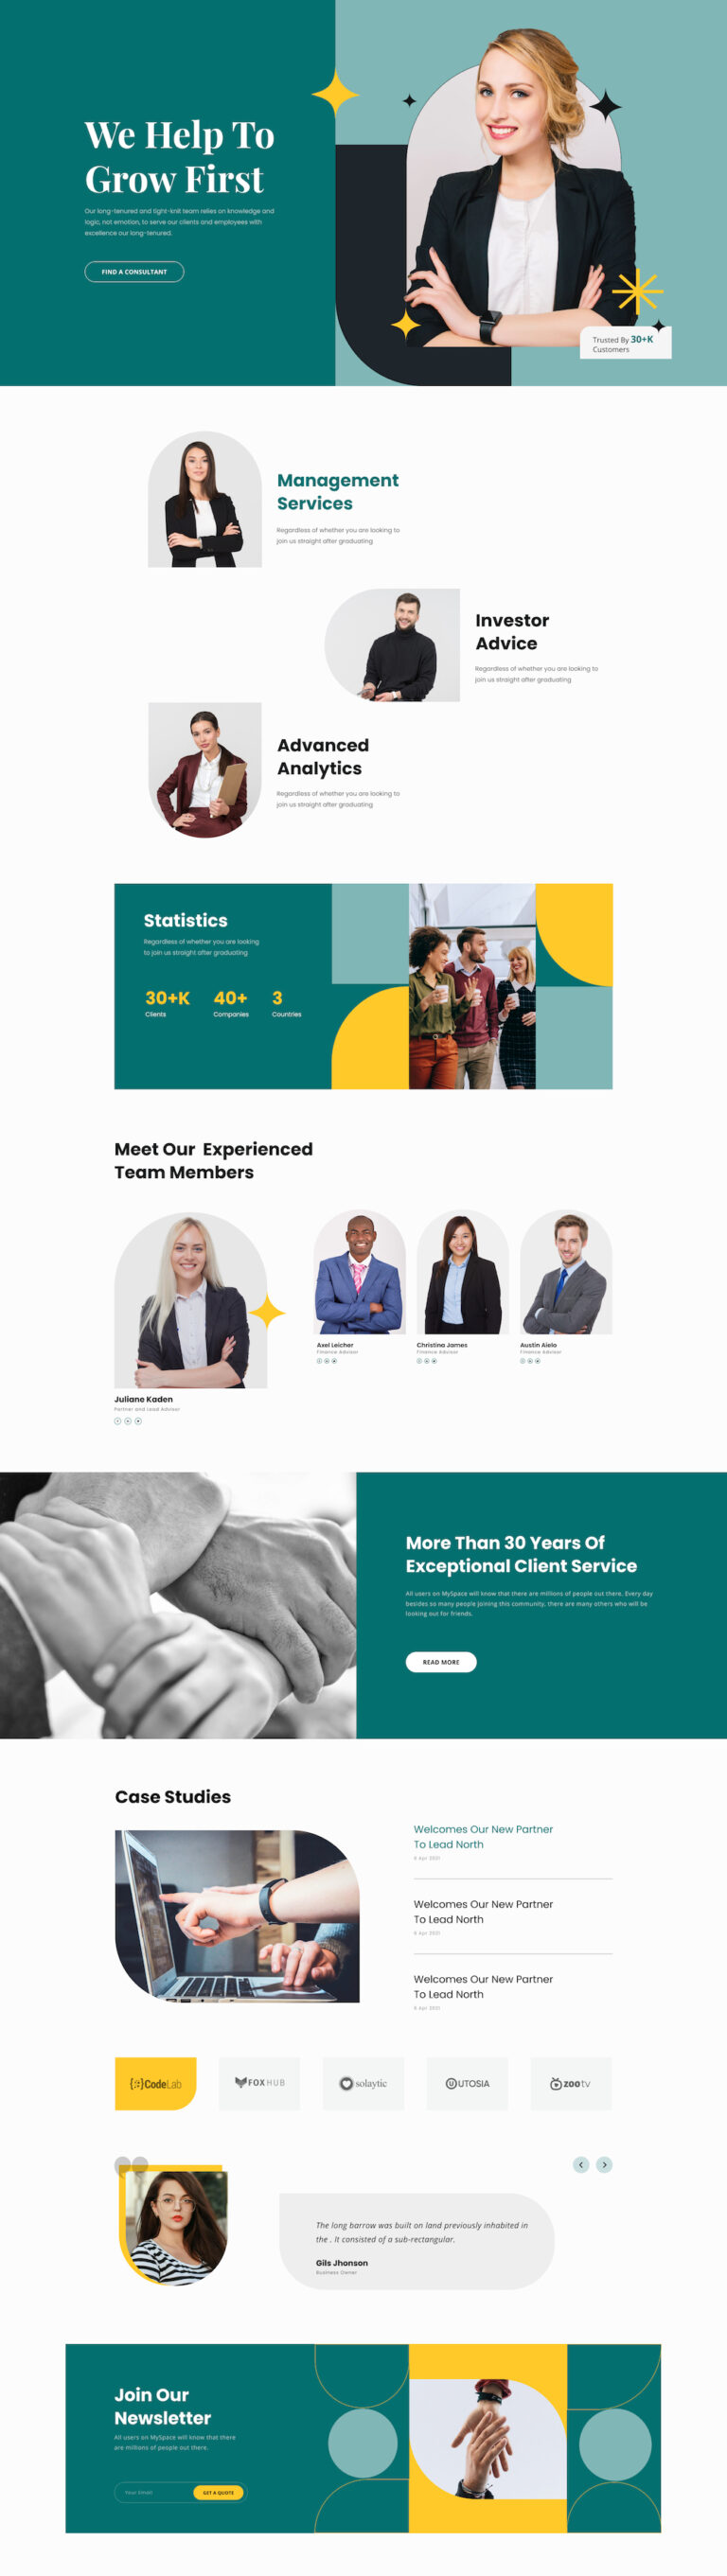 introducing-consultancy-firm-a-free-layout-bundle-for-sp-page-bundle-pro